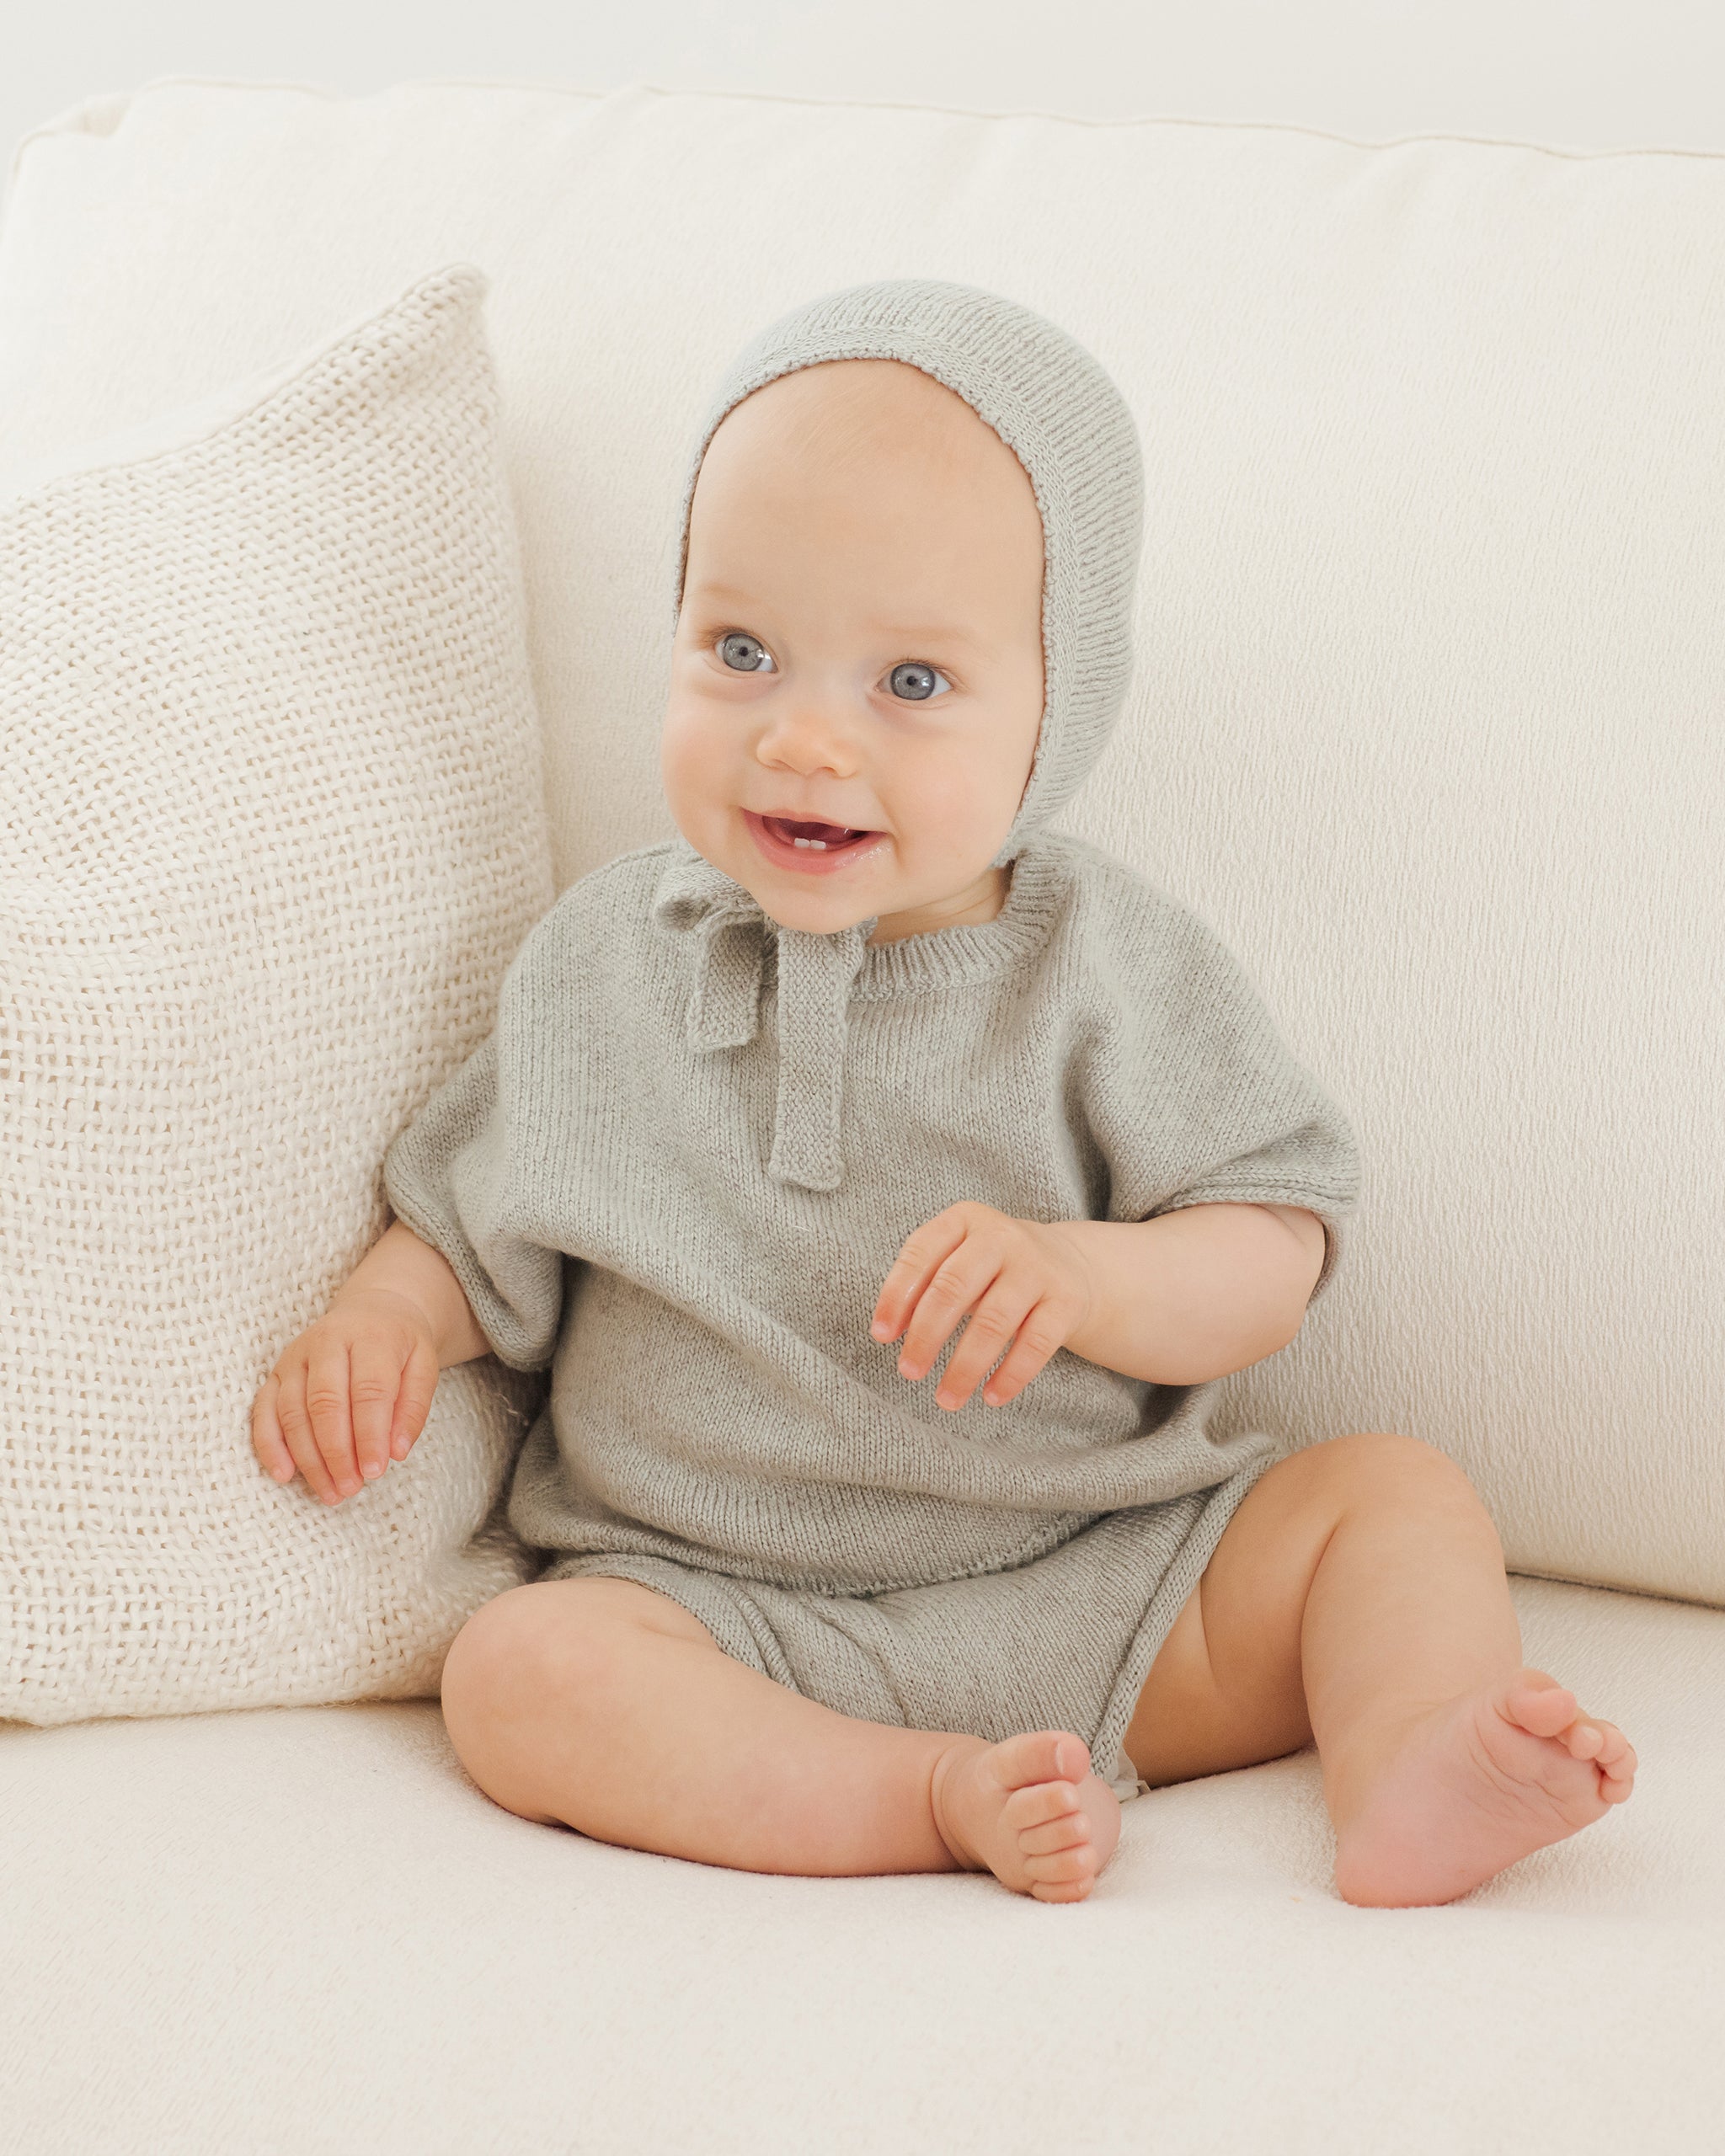 Knit Bonnet || Heathered Sky - Rylee + Cru | Kids Clothes | Trendy Baby Clothes | Modern Infant Outfits |